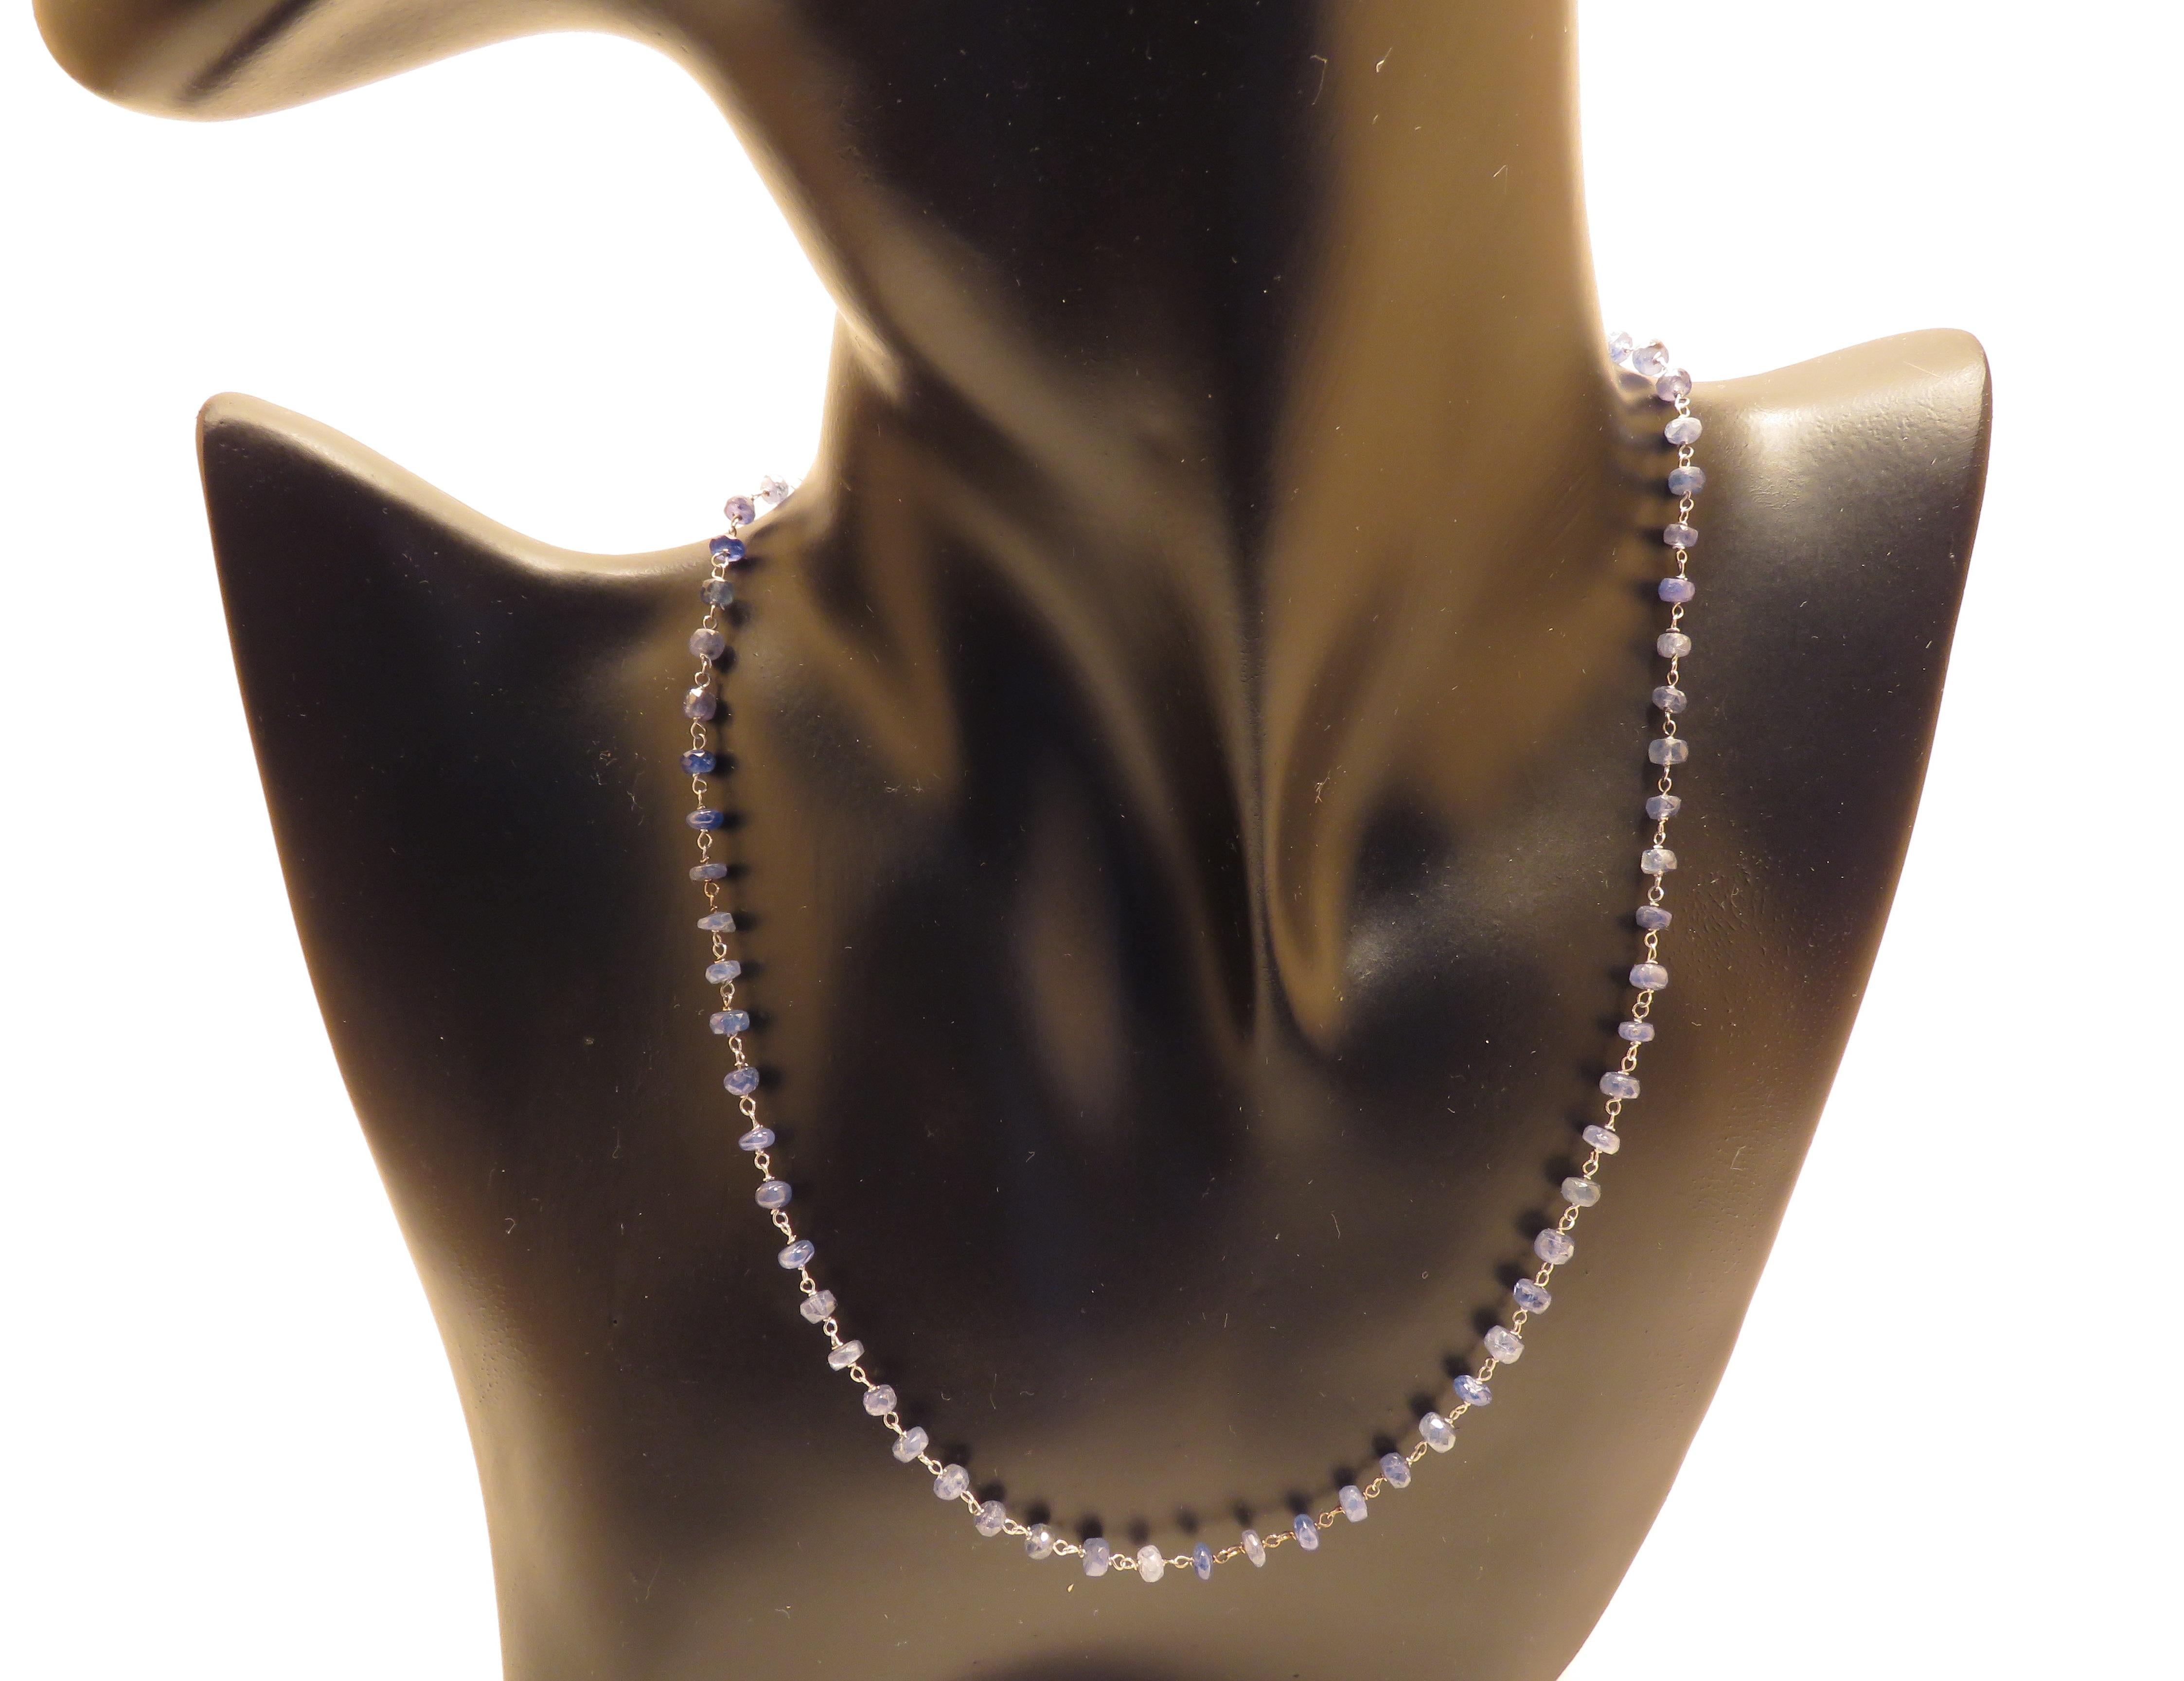 Wonderful natural sapphires nuggets necklace in 18k white gold. 
Total length of the necklace is 410 millimeters / 16.14 inches.
This item is stamped with the Italian Gold Mark 750 - 716MI.
Ready for delivery. It can be shipped with express delivery